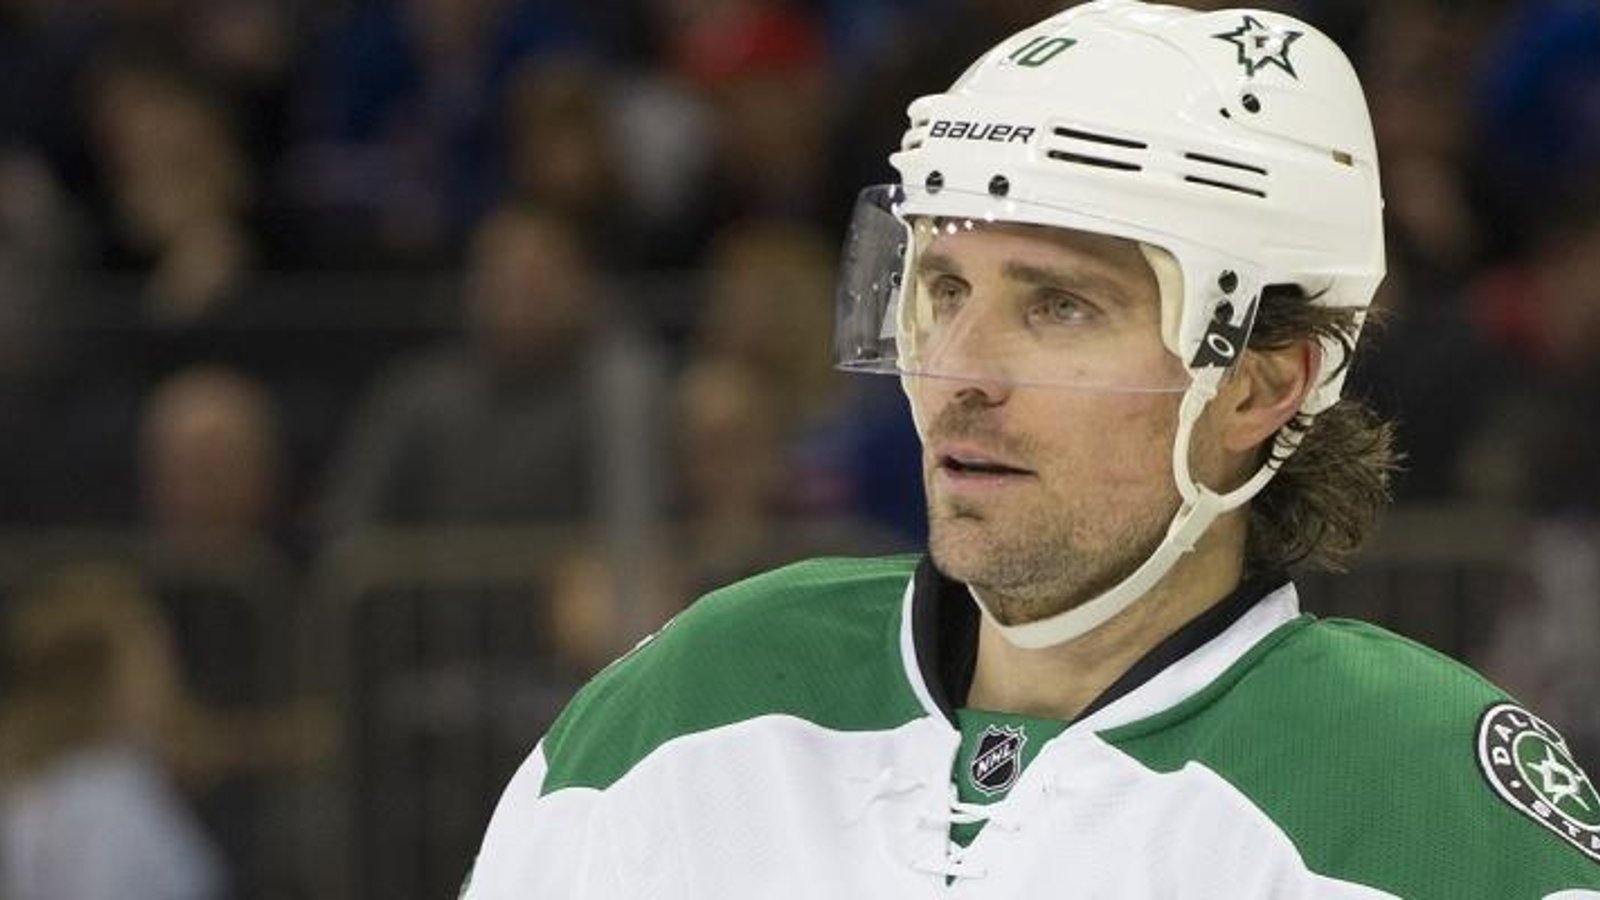 Patrick Sharp talks his first game back in Chicago.